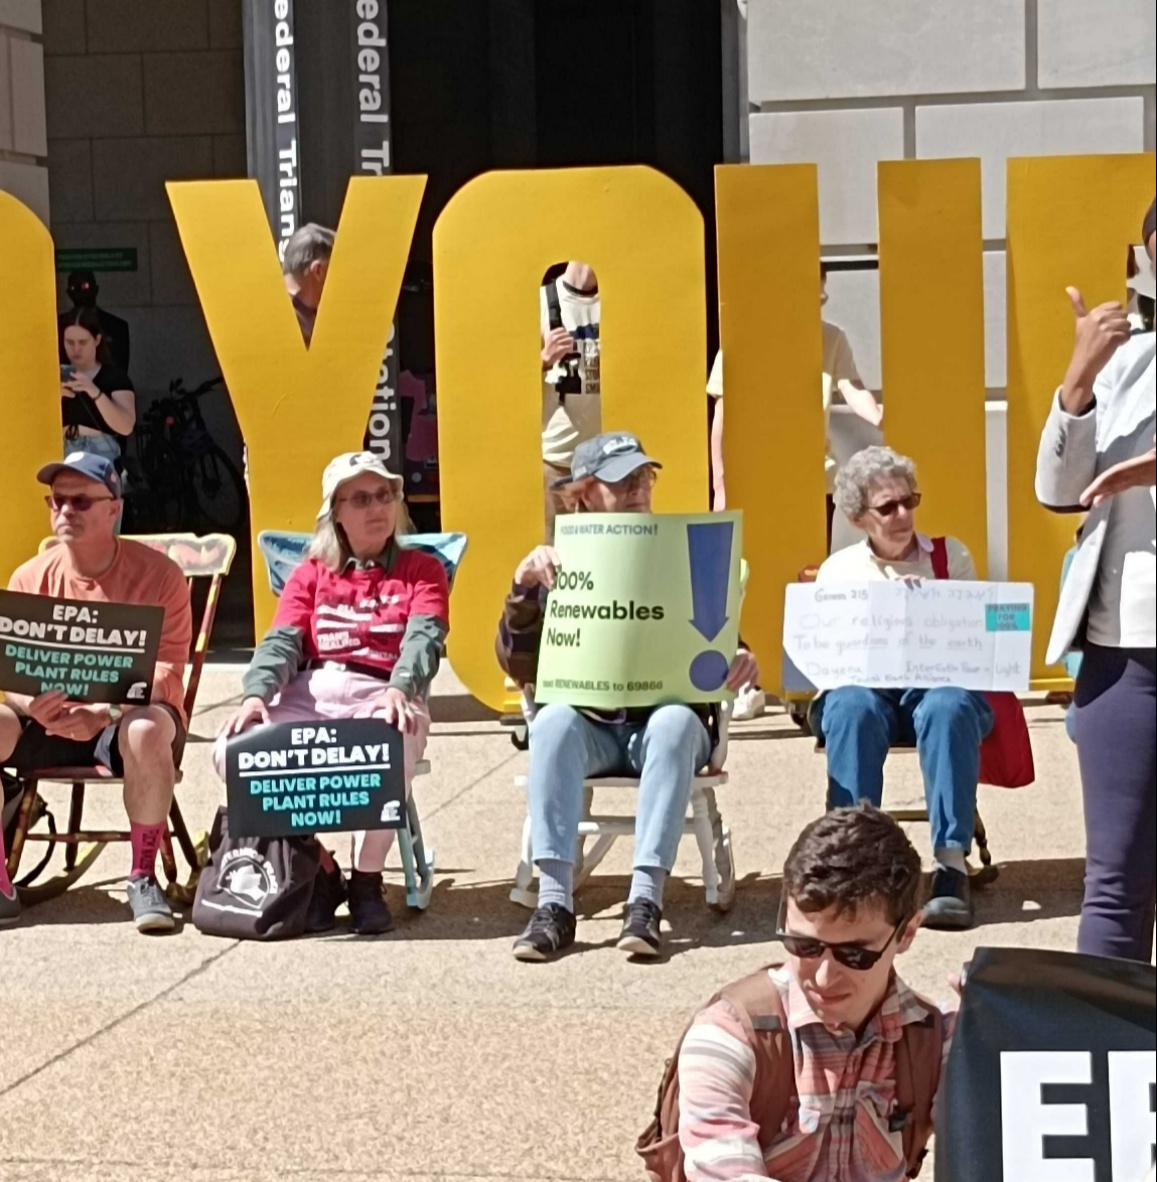 We made it to @CCAN's rally today in DC to ask @EPA to stop the delay on power plant rules!

#EPAStopTheDelay #StopPollution #ClimateChange #CleanEnergy #Solar #CommunitySolar #StopFossilFuels #WeGoBeyond #BCorp #BusinessforGood